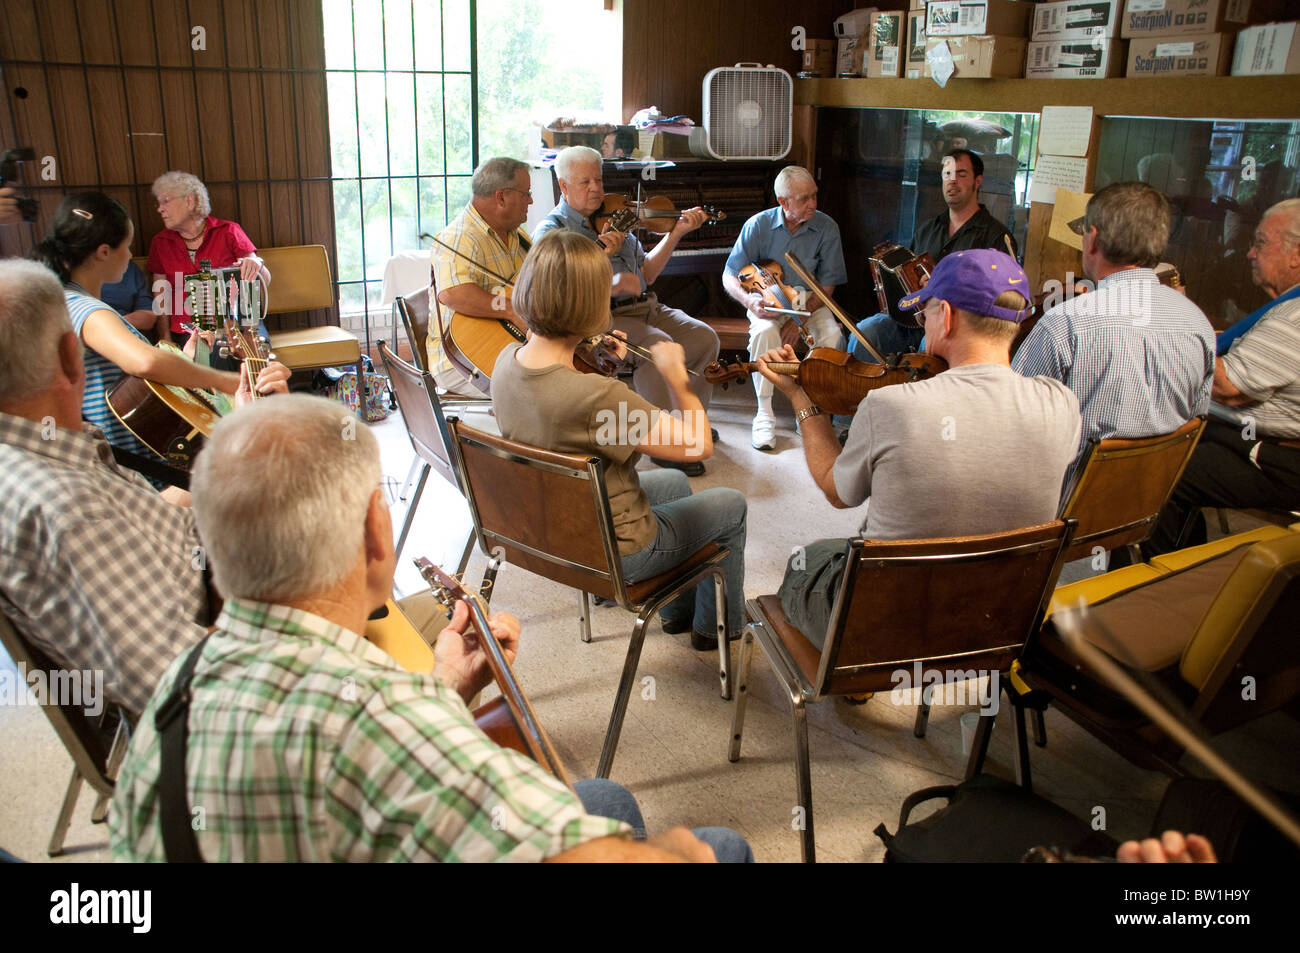 A gathering of Cajun musicians taking part in a weekly acoustic jam session at the Savoy Music Center in the town of Eunice, near Lafayette Louisiana Stock Photo